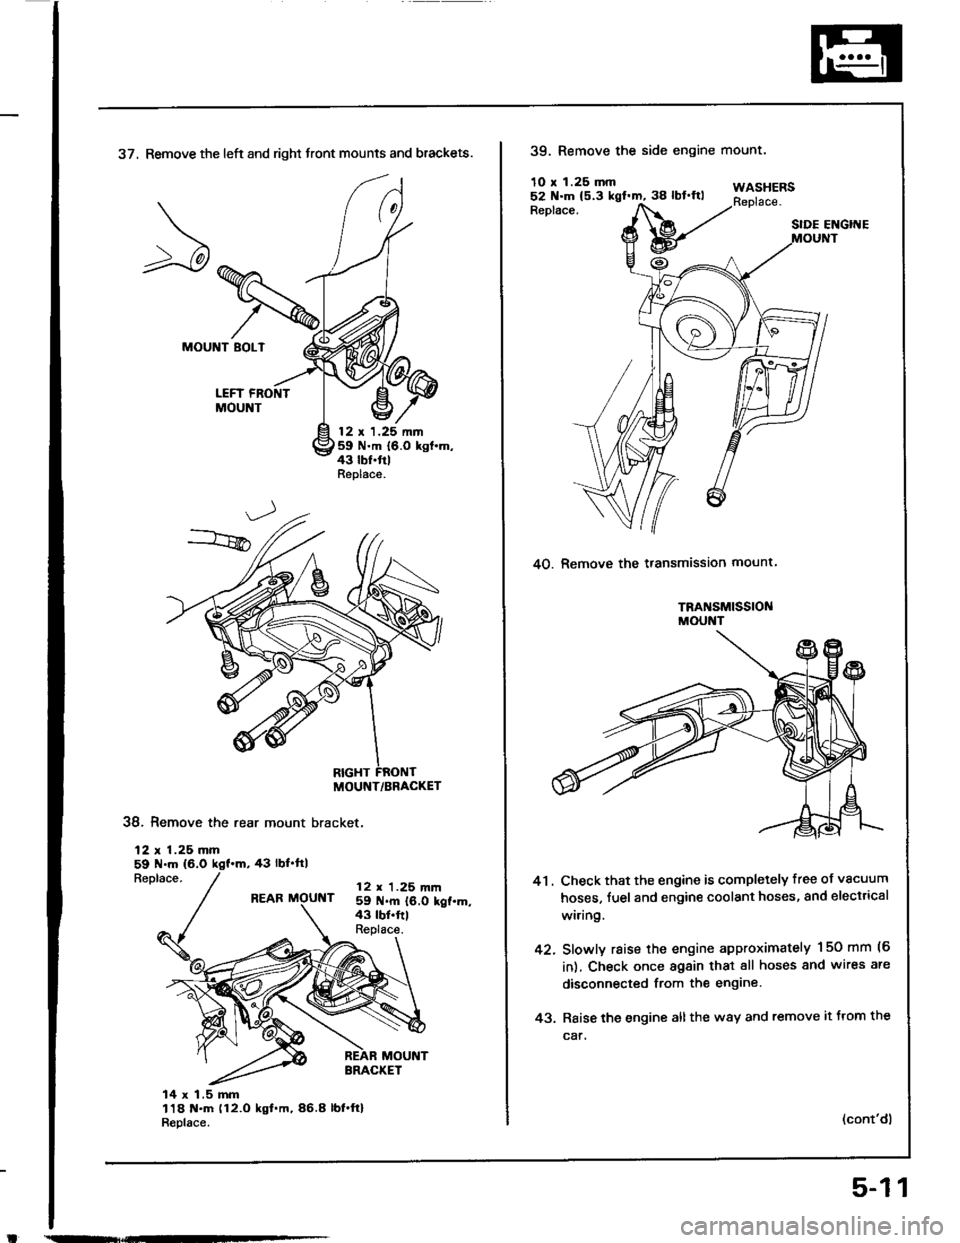 HONDA INTEGRA 1994 4.G Workshop Manual 37, Remove the left and right front mounts and brackets.
MOUNT BOLT
LEFT FRONTMOUNT
12 t 1.25 nn59 N.m {6.0 kgt.m,43 lbf.trlReplace.
38. Remove the rear mount bracket,
12 r 1.25 mm59 N.m (6.0
Replace.